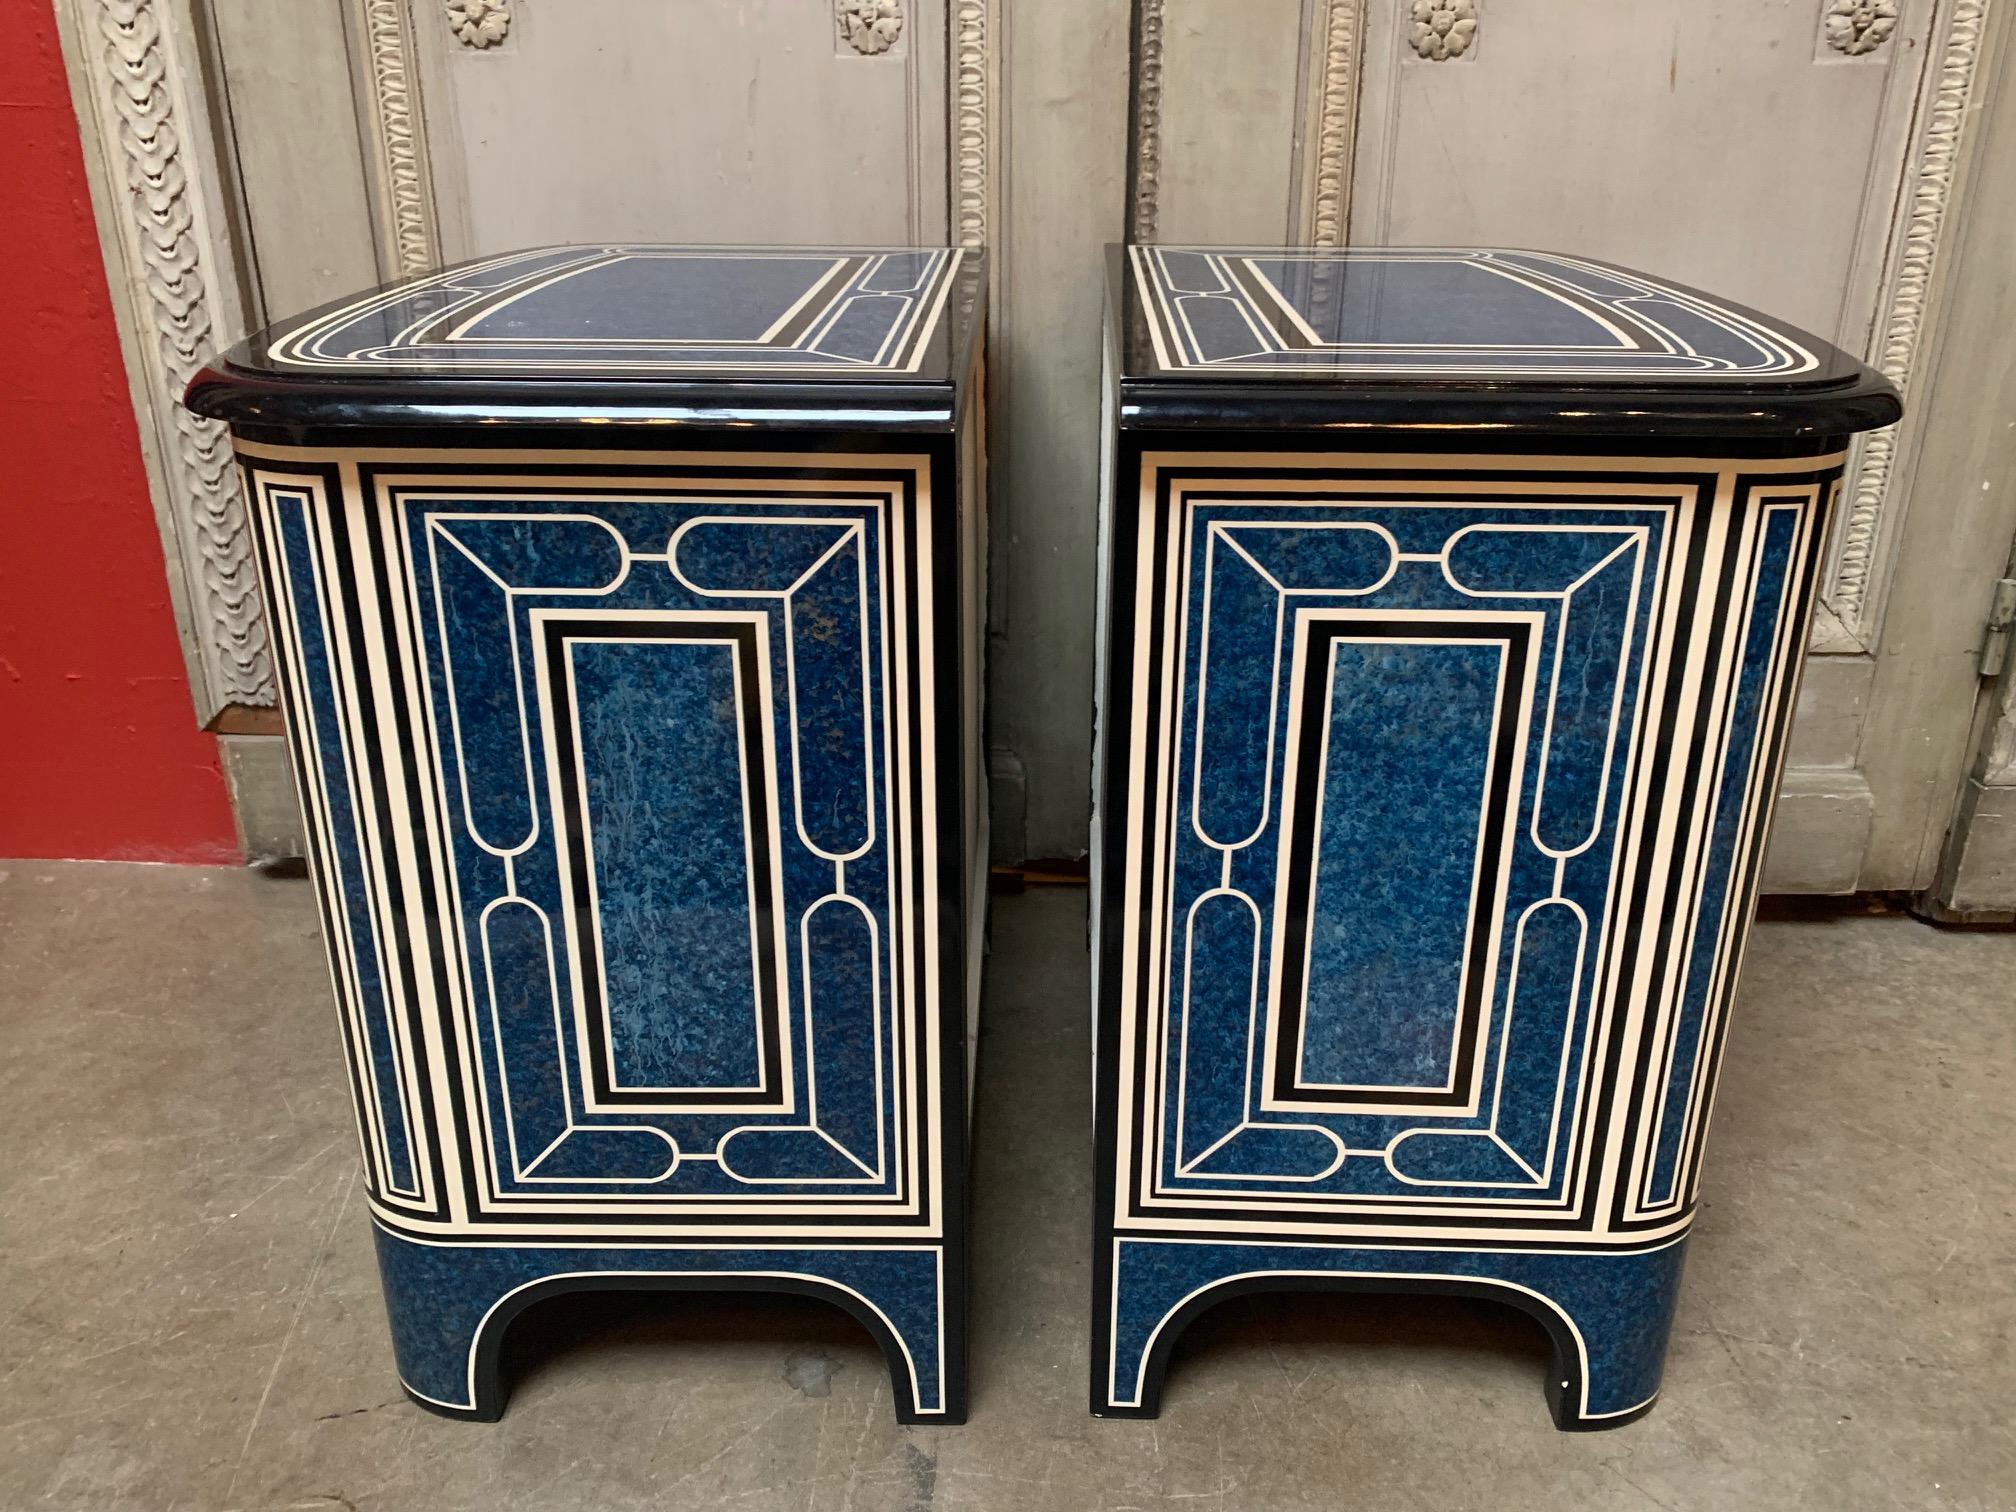 Pair of French Regence Style Commodes with a Blue and White Laquered Finsish 1